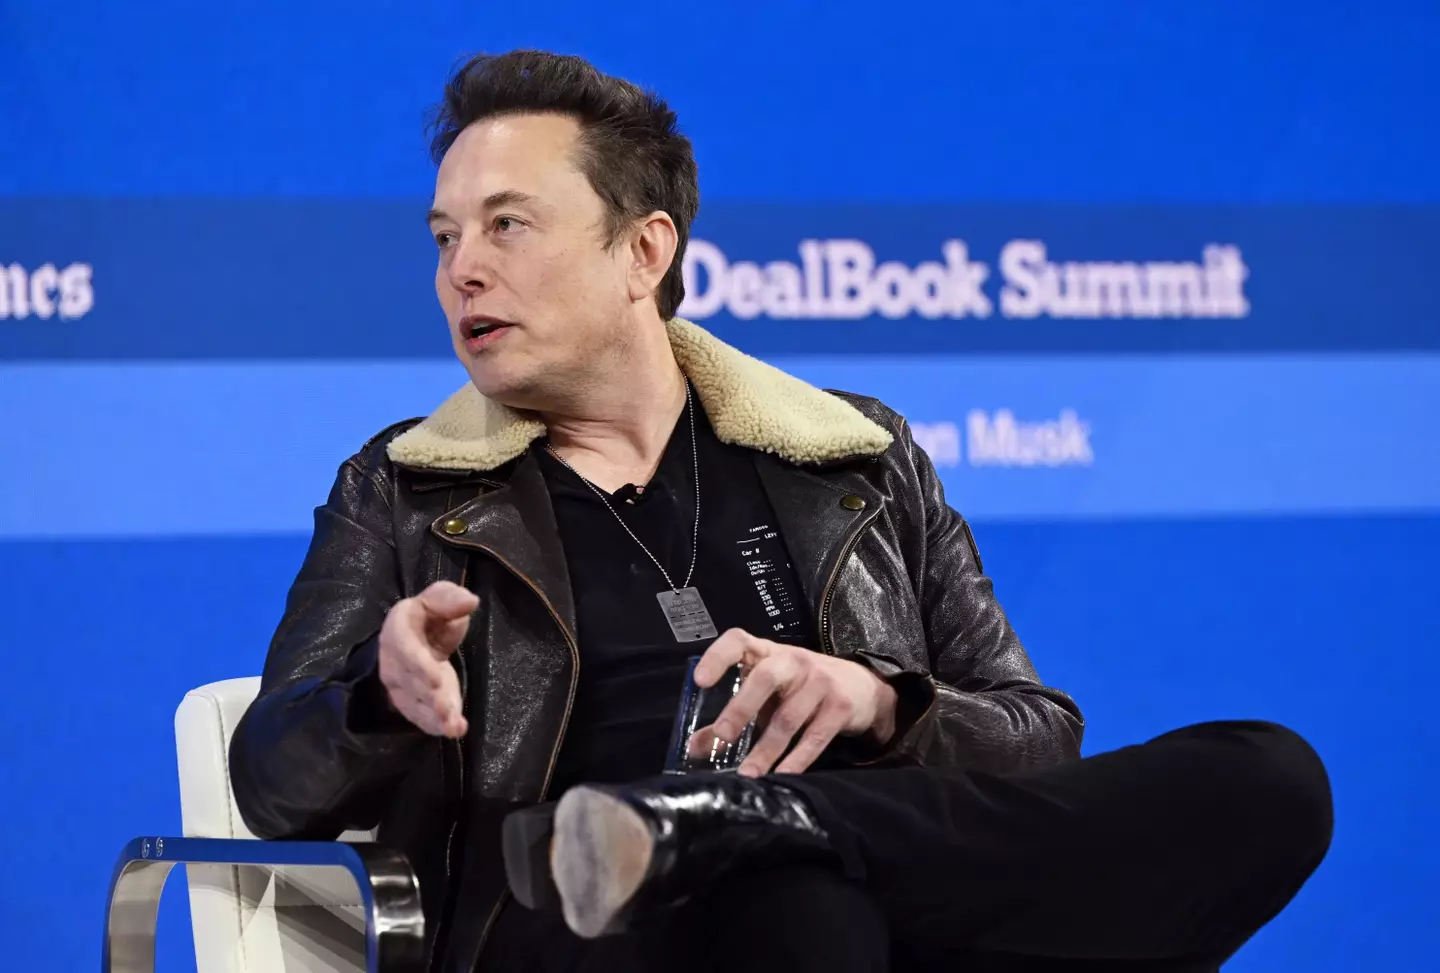 Musk was speaking at The New York Times DealBook Summit.